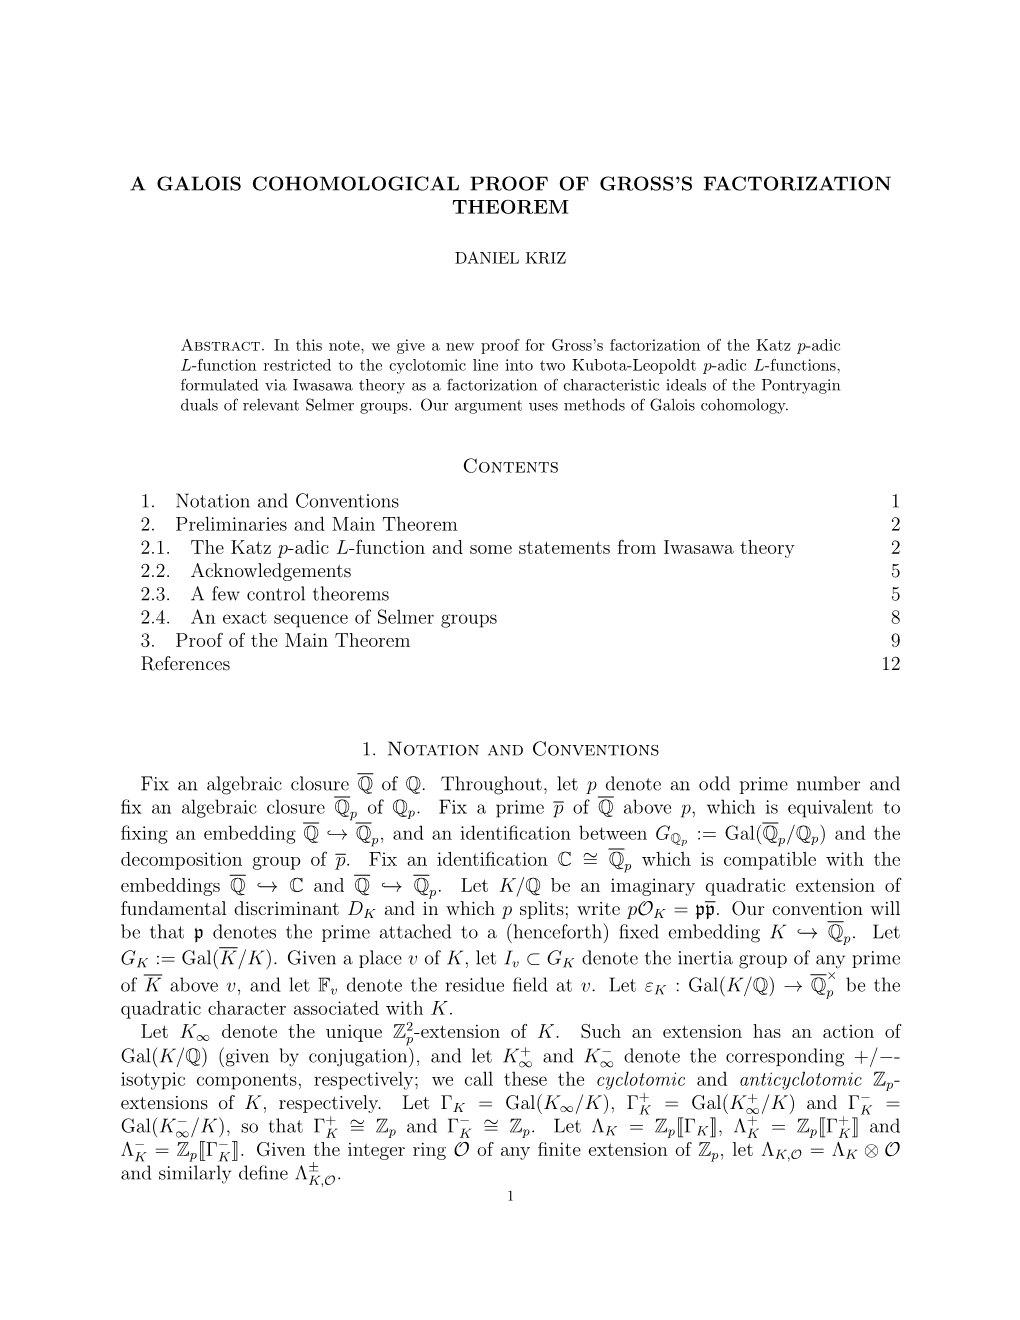 A Galois Cohomological Proof of Gross's